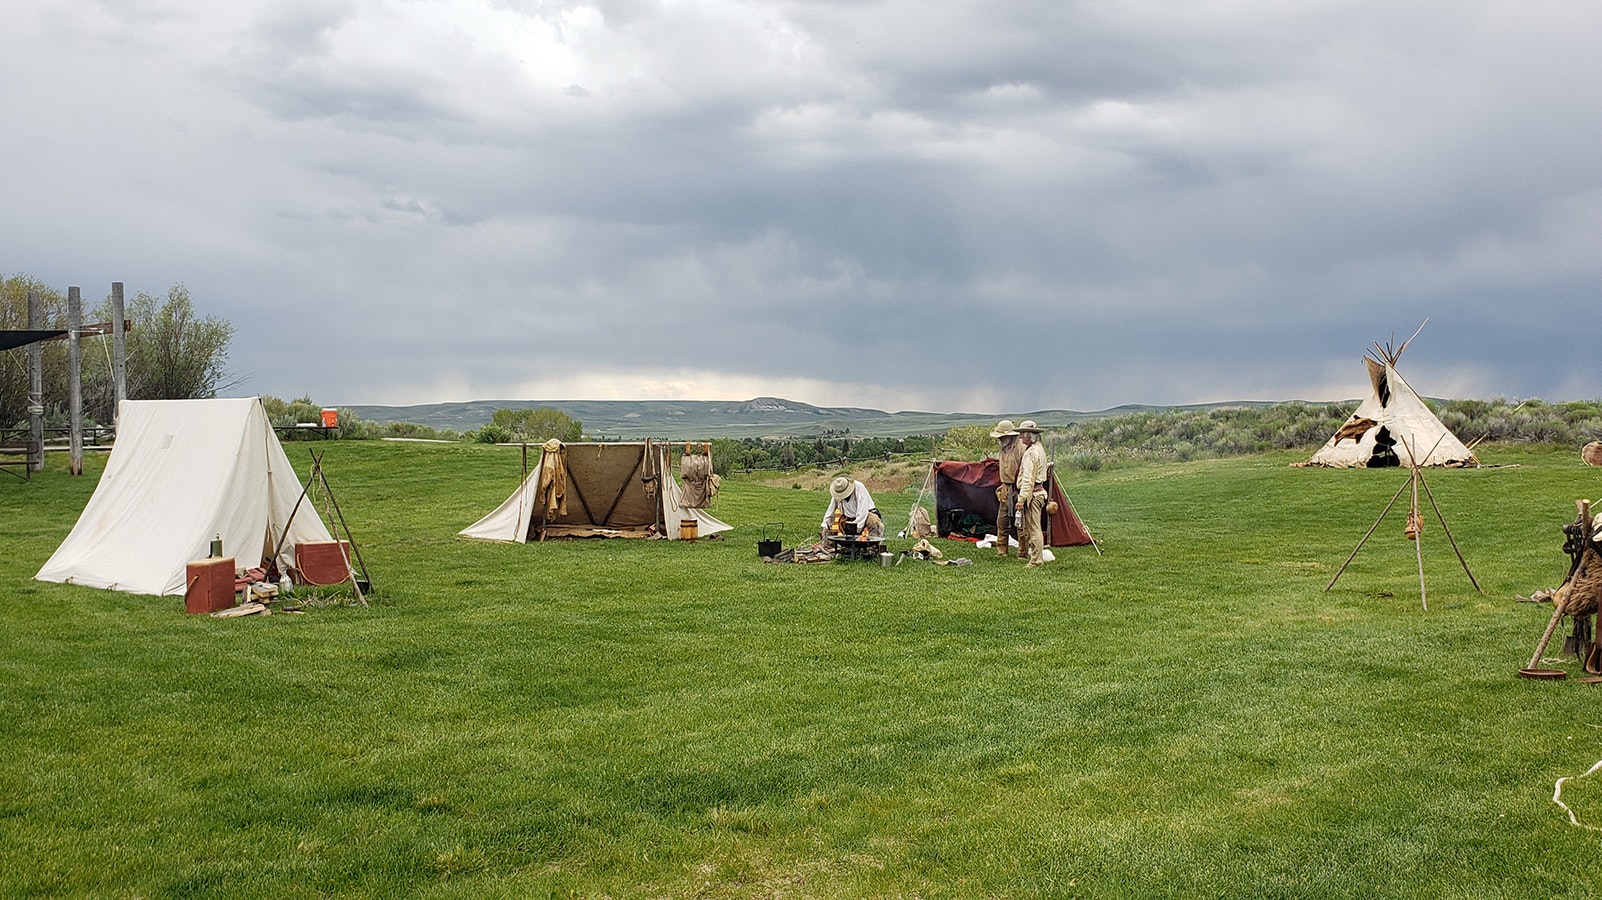 American Mountain Men Association had a living history encampment for the recent Green River Rendezvous in Pinedale.